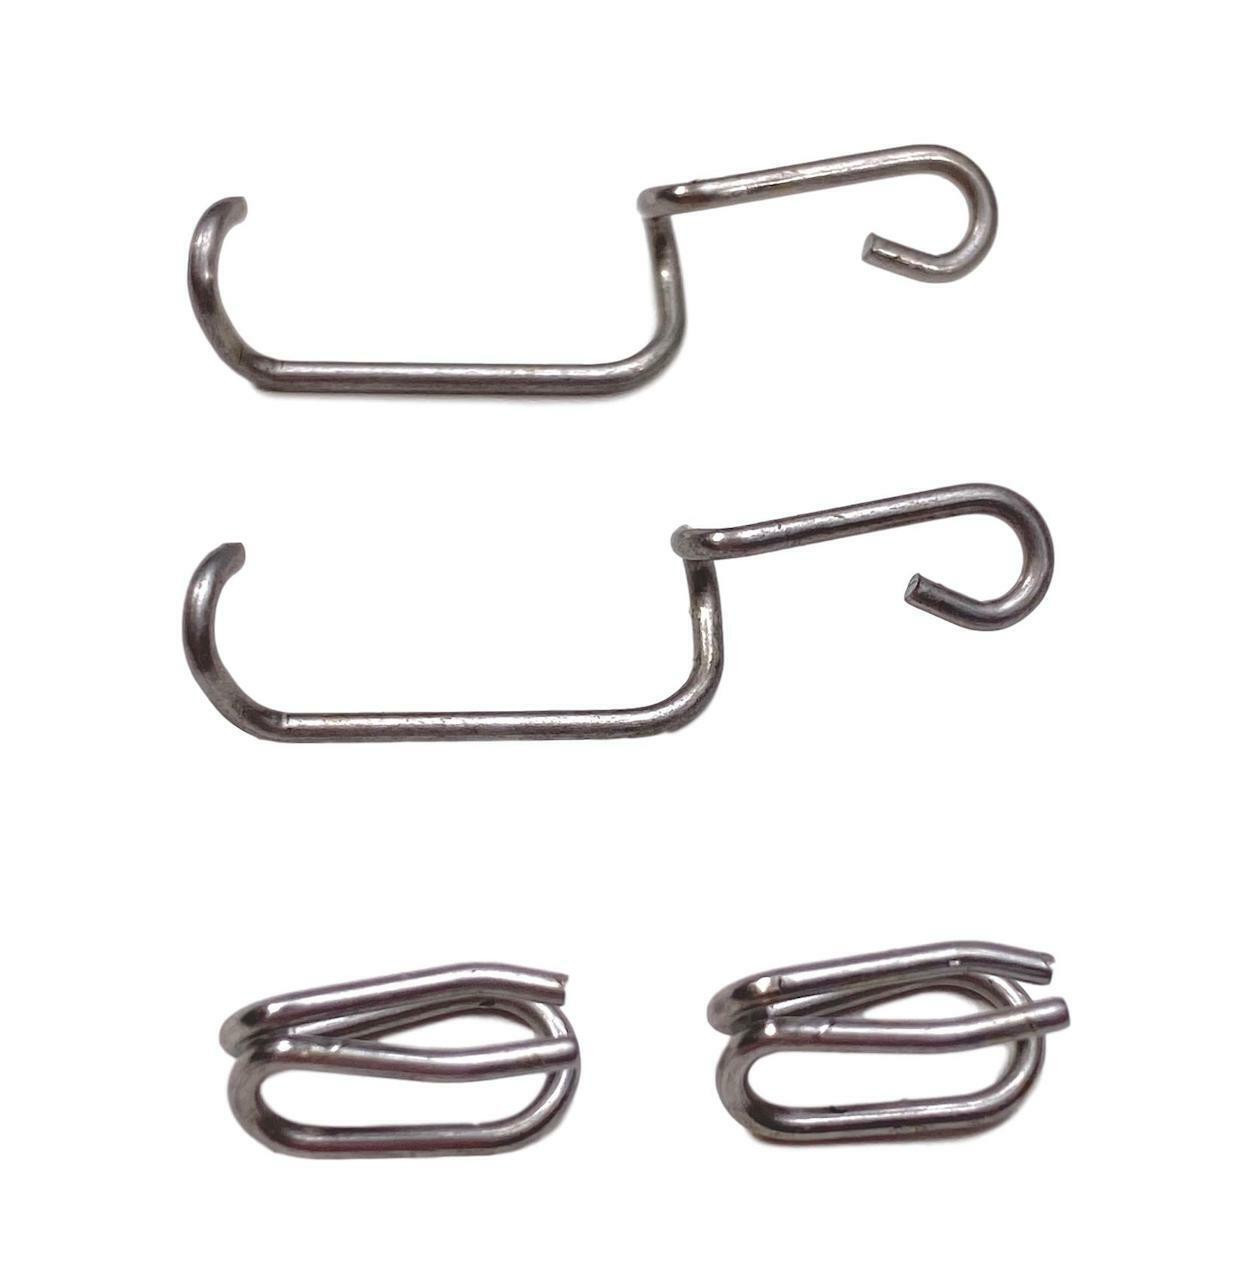 1955-57 Chevy Nomad Lower Tailgate Clips, Set of 4